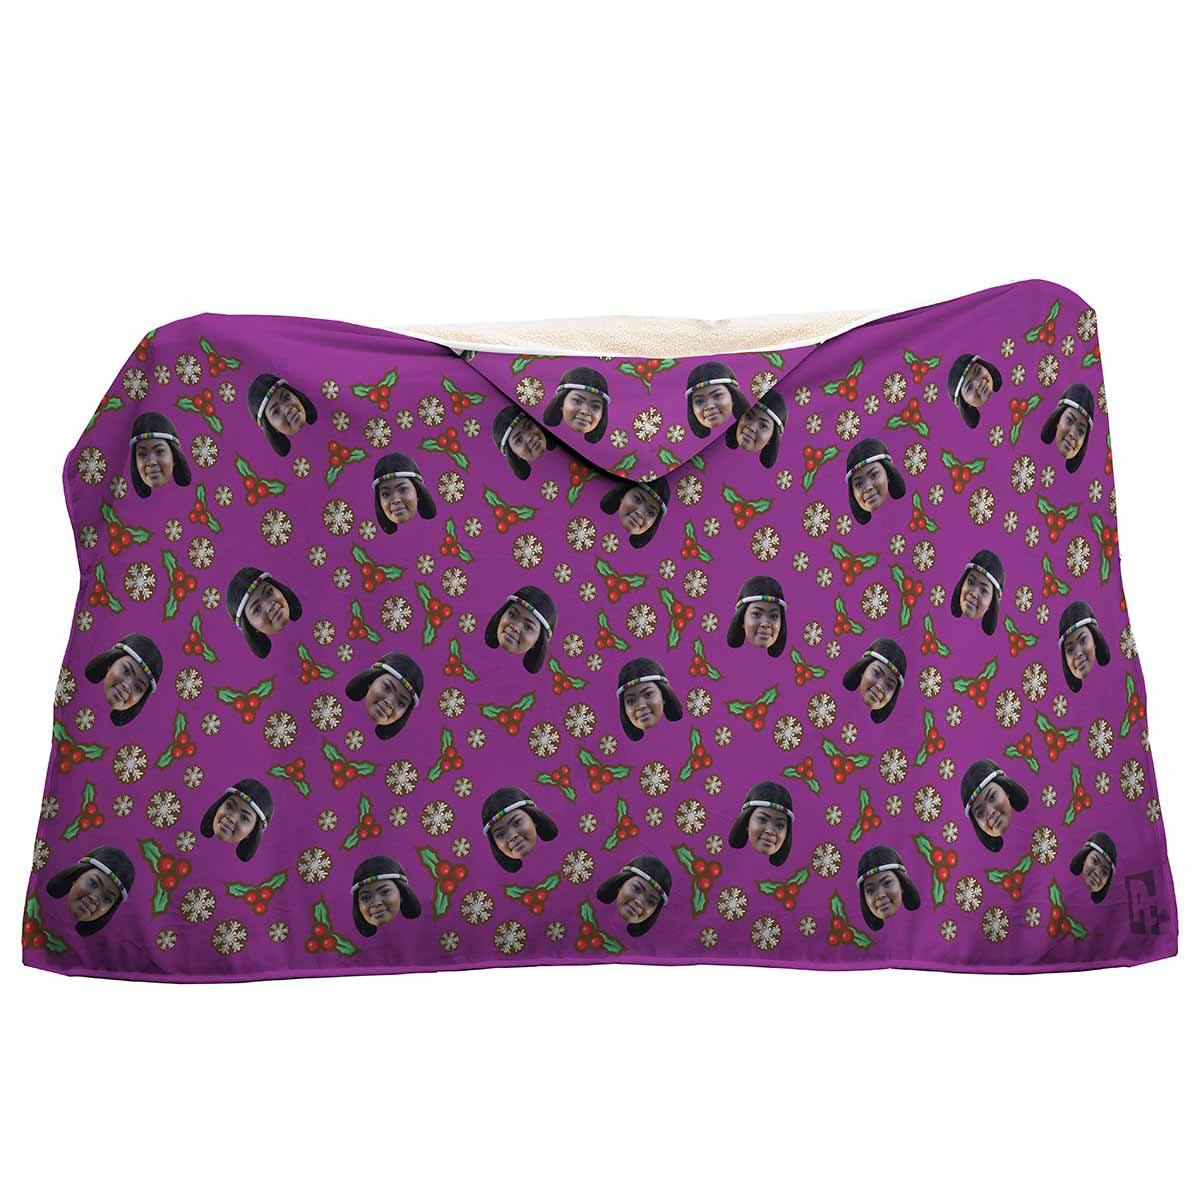 purple Mistletoe hooded blanket personalized with photo of face printed on it